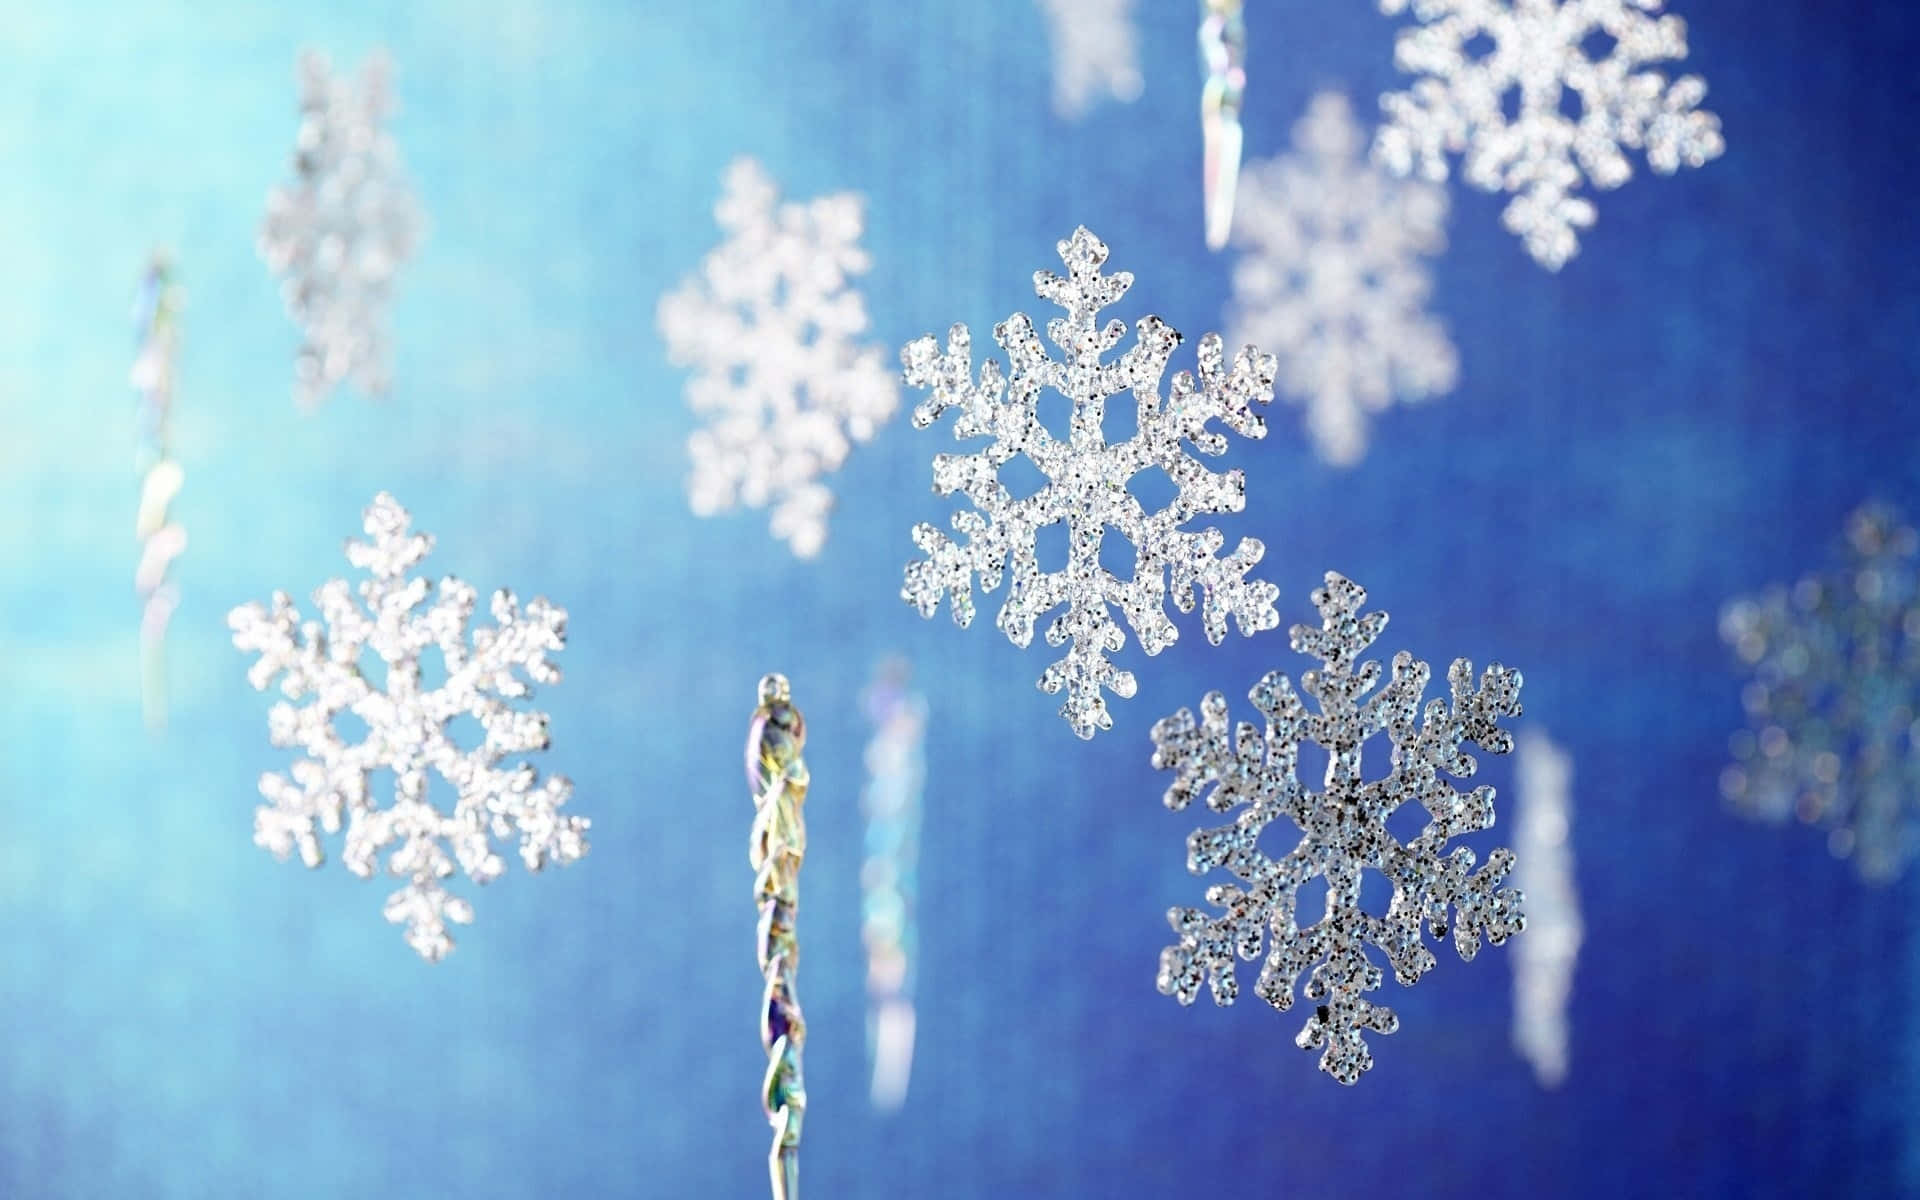 A crystalline snowflake against an icy blue backdrop